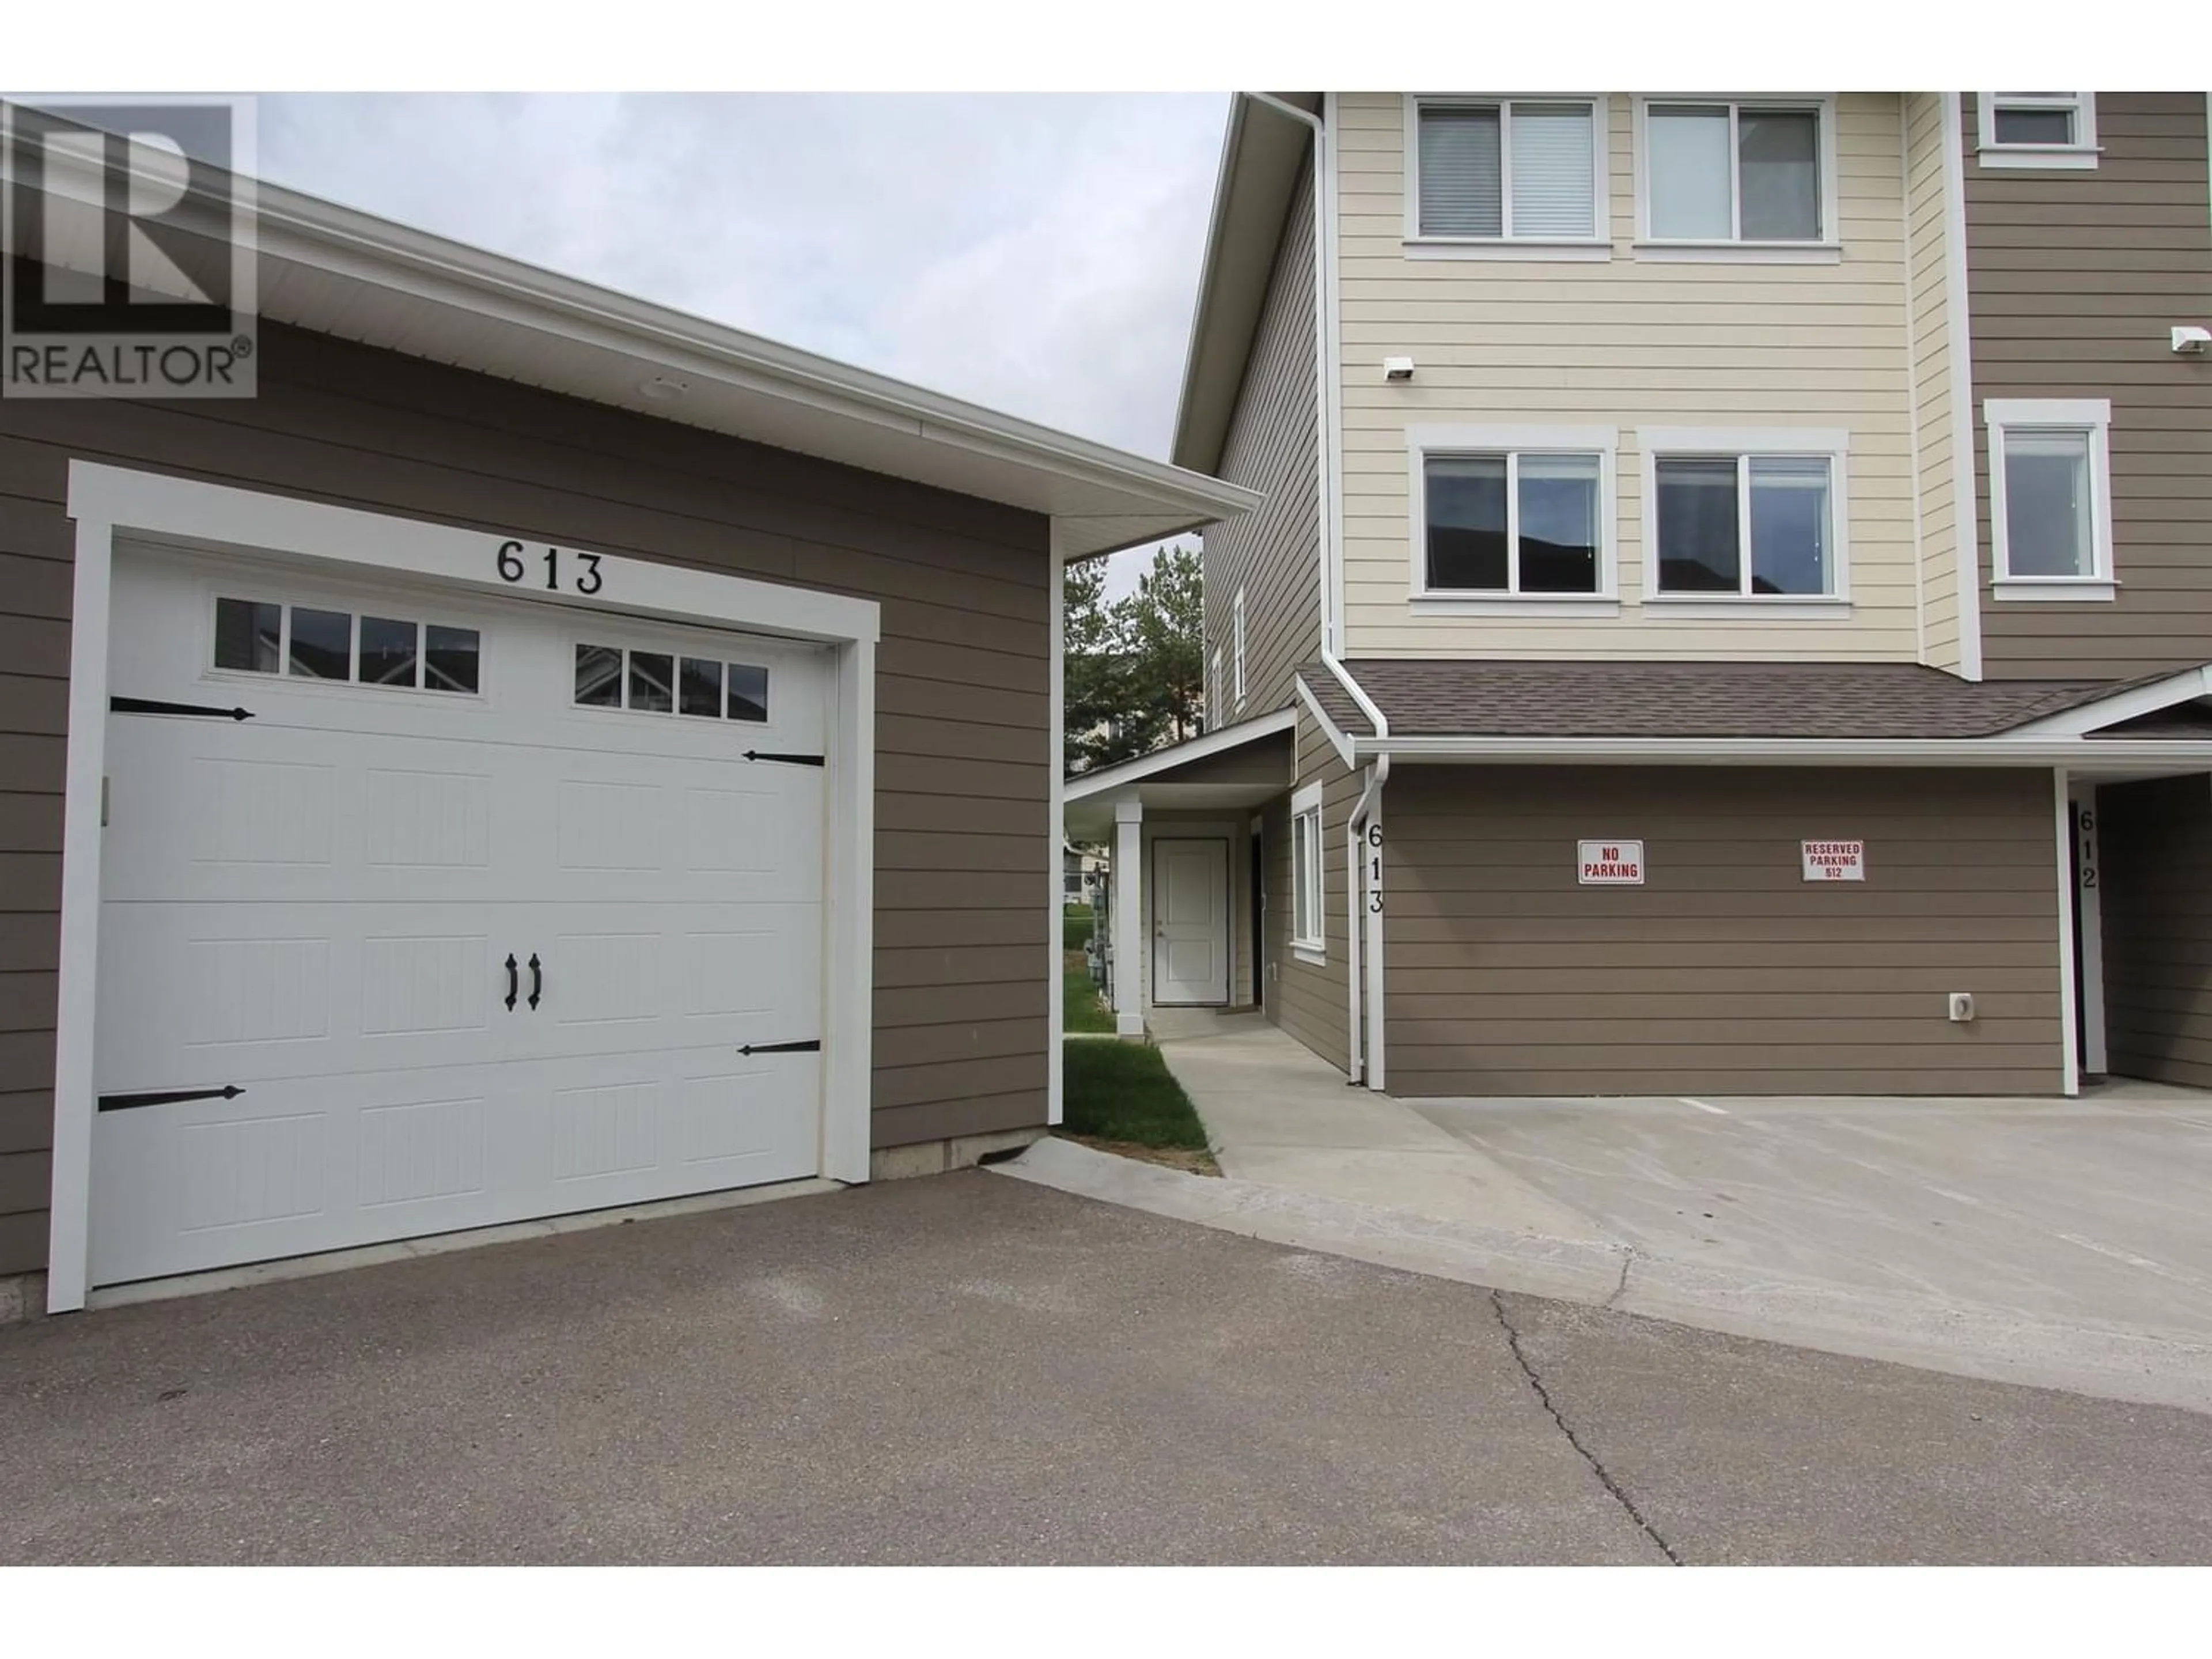 A pic from exterior of the house or condo for 613 467 S TABOR BOULEVARD, Prince George British Columbia V2M0B1